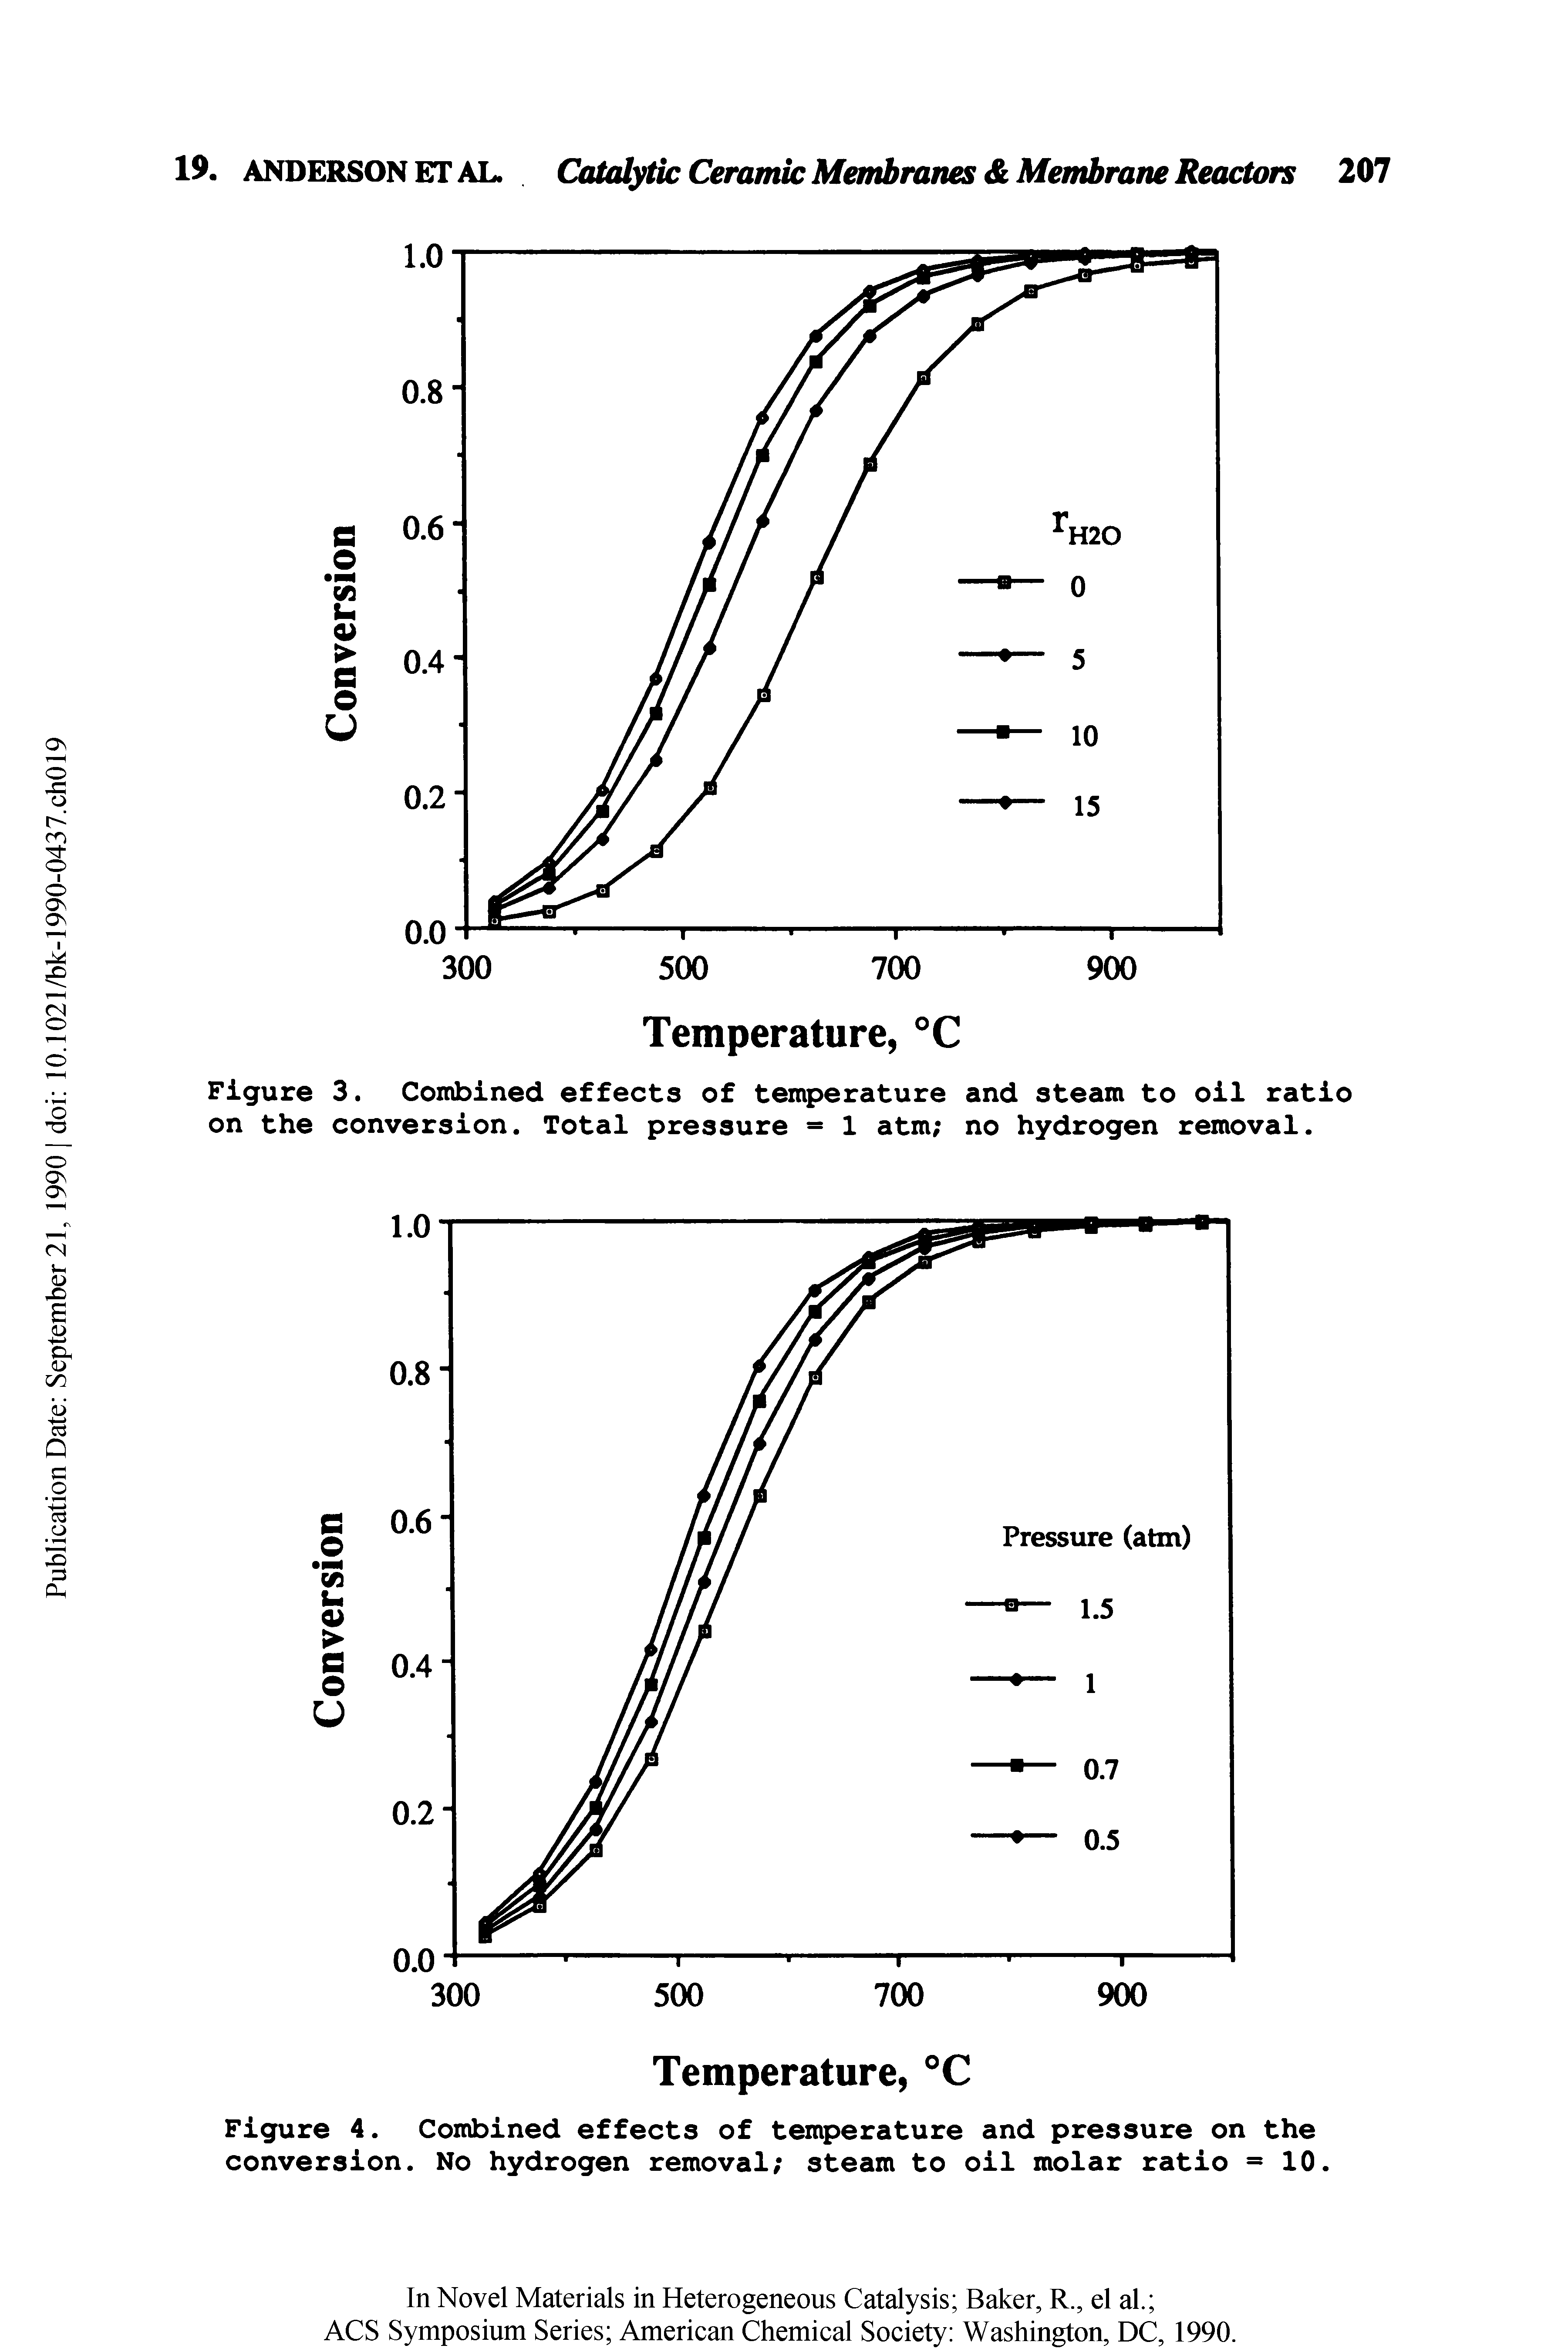 Figure 3. Combined effects of temperature and steam to oil ratio on the conversion. Total pressure = 1 atm no hydrogen removal.